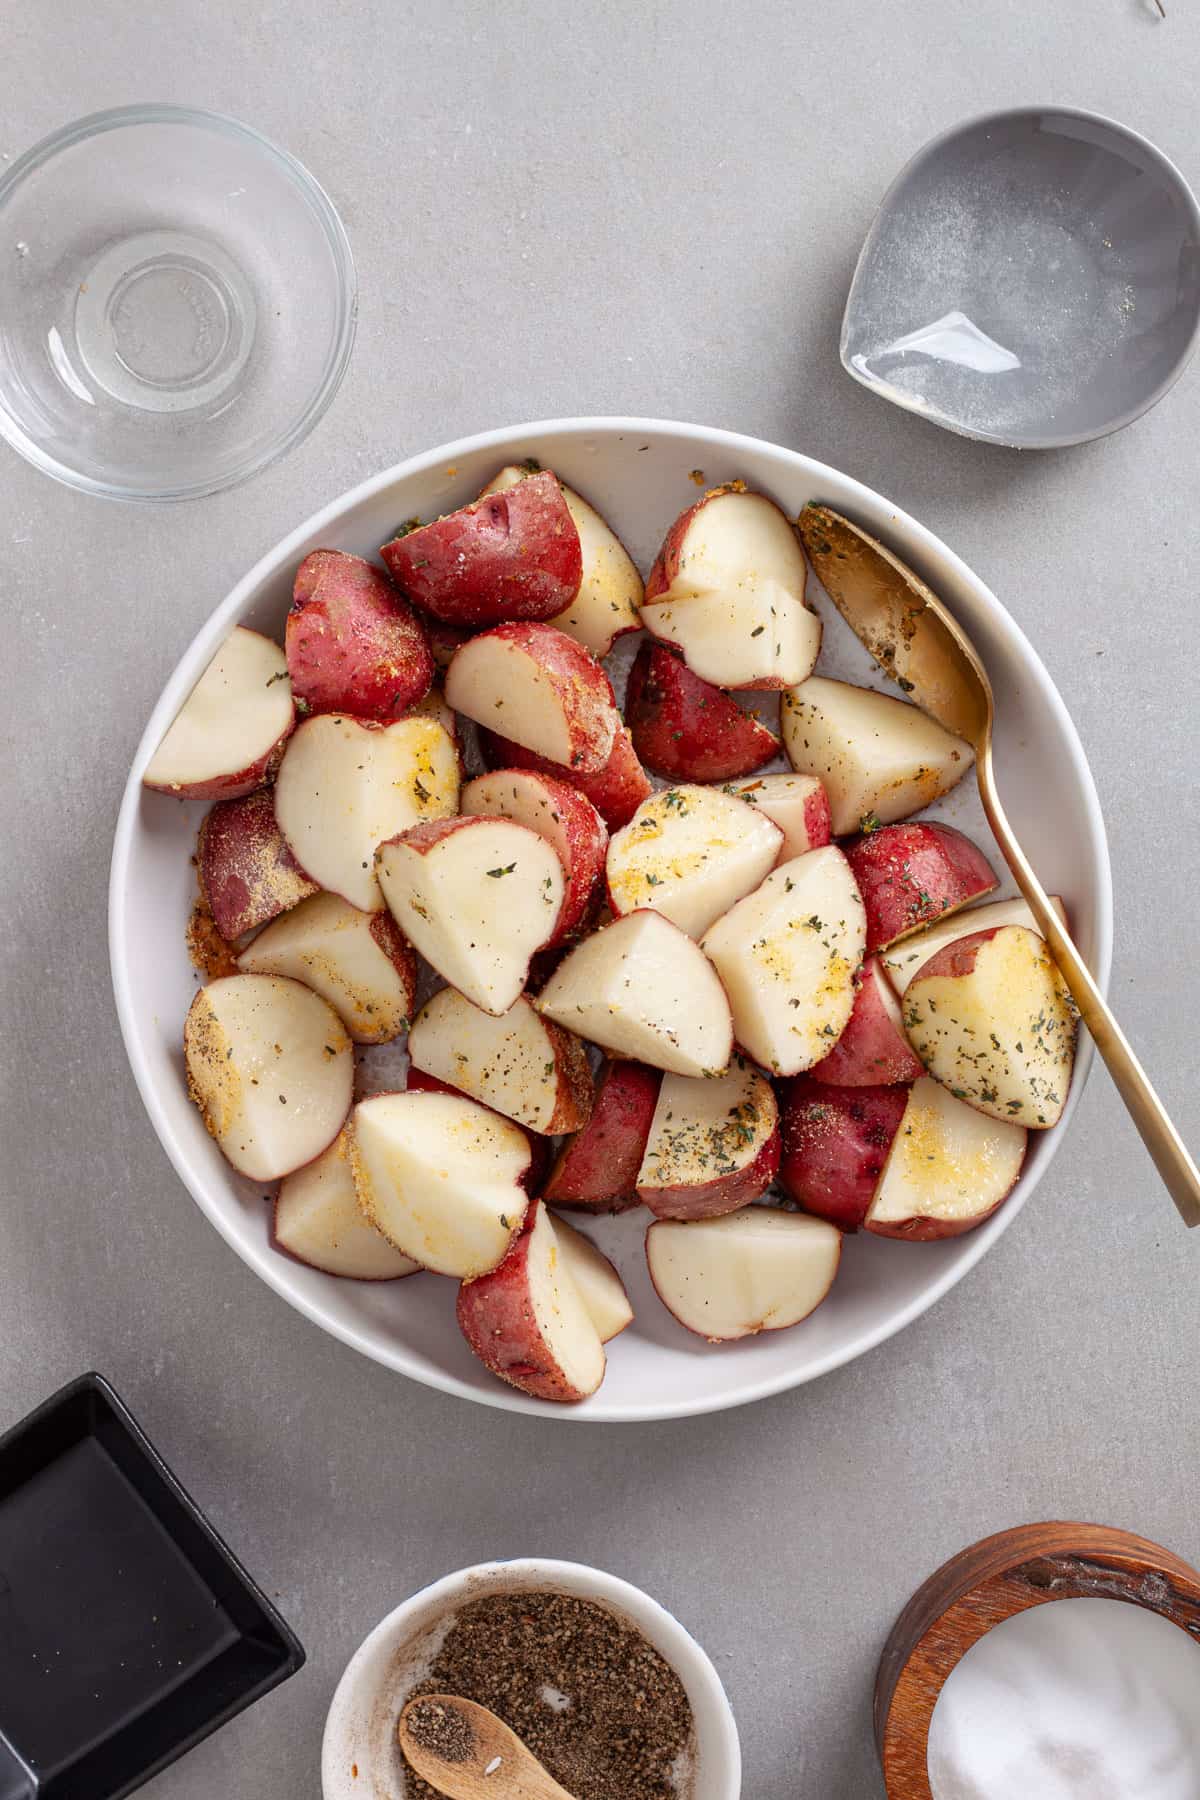 A bowl of chopped red potatoes seasoned with garlic powder, oil and fresh thyme.